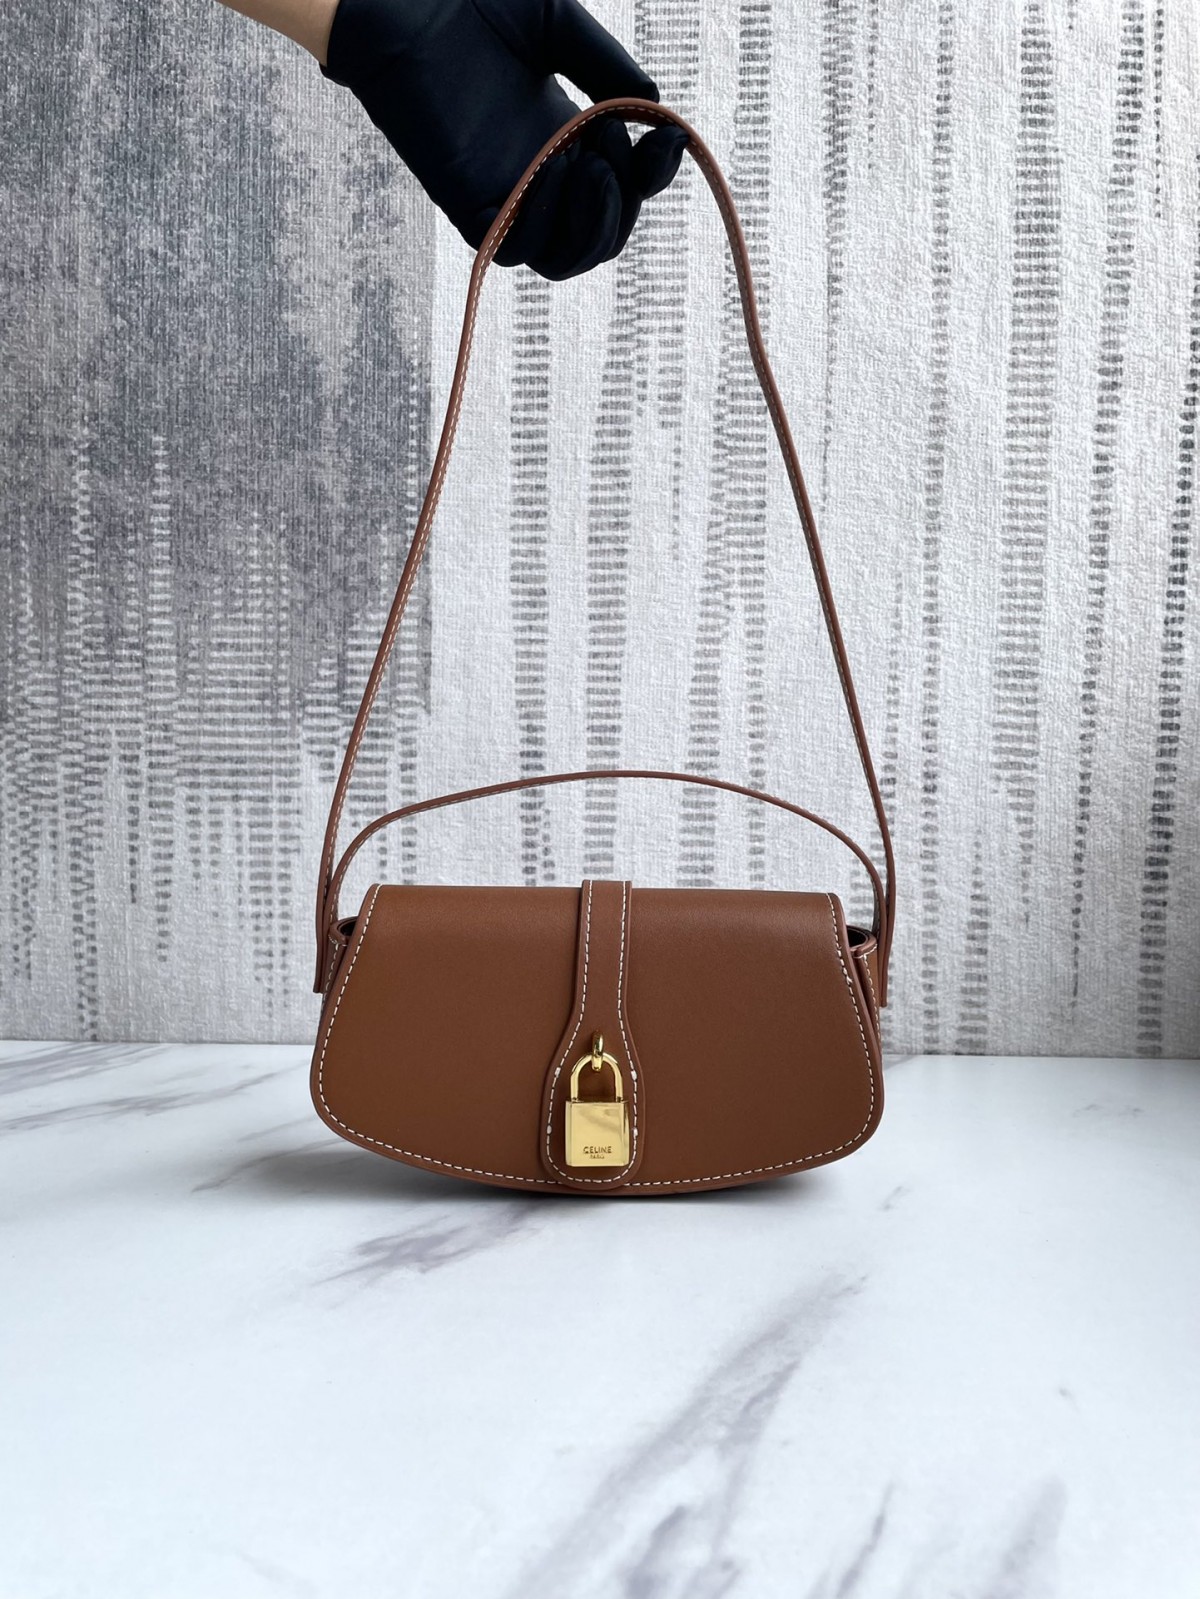 The best Celine Tabou replica bags to buy this fall and winter (2022 Edition)-Best Quality Fake Louis Vuitton Bag Online Store, Replica designer bag ru